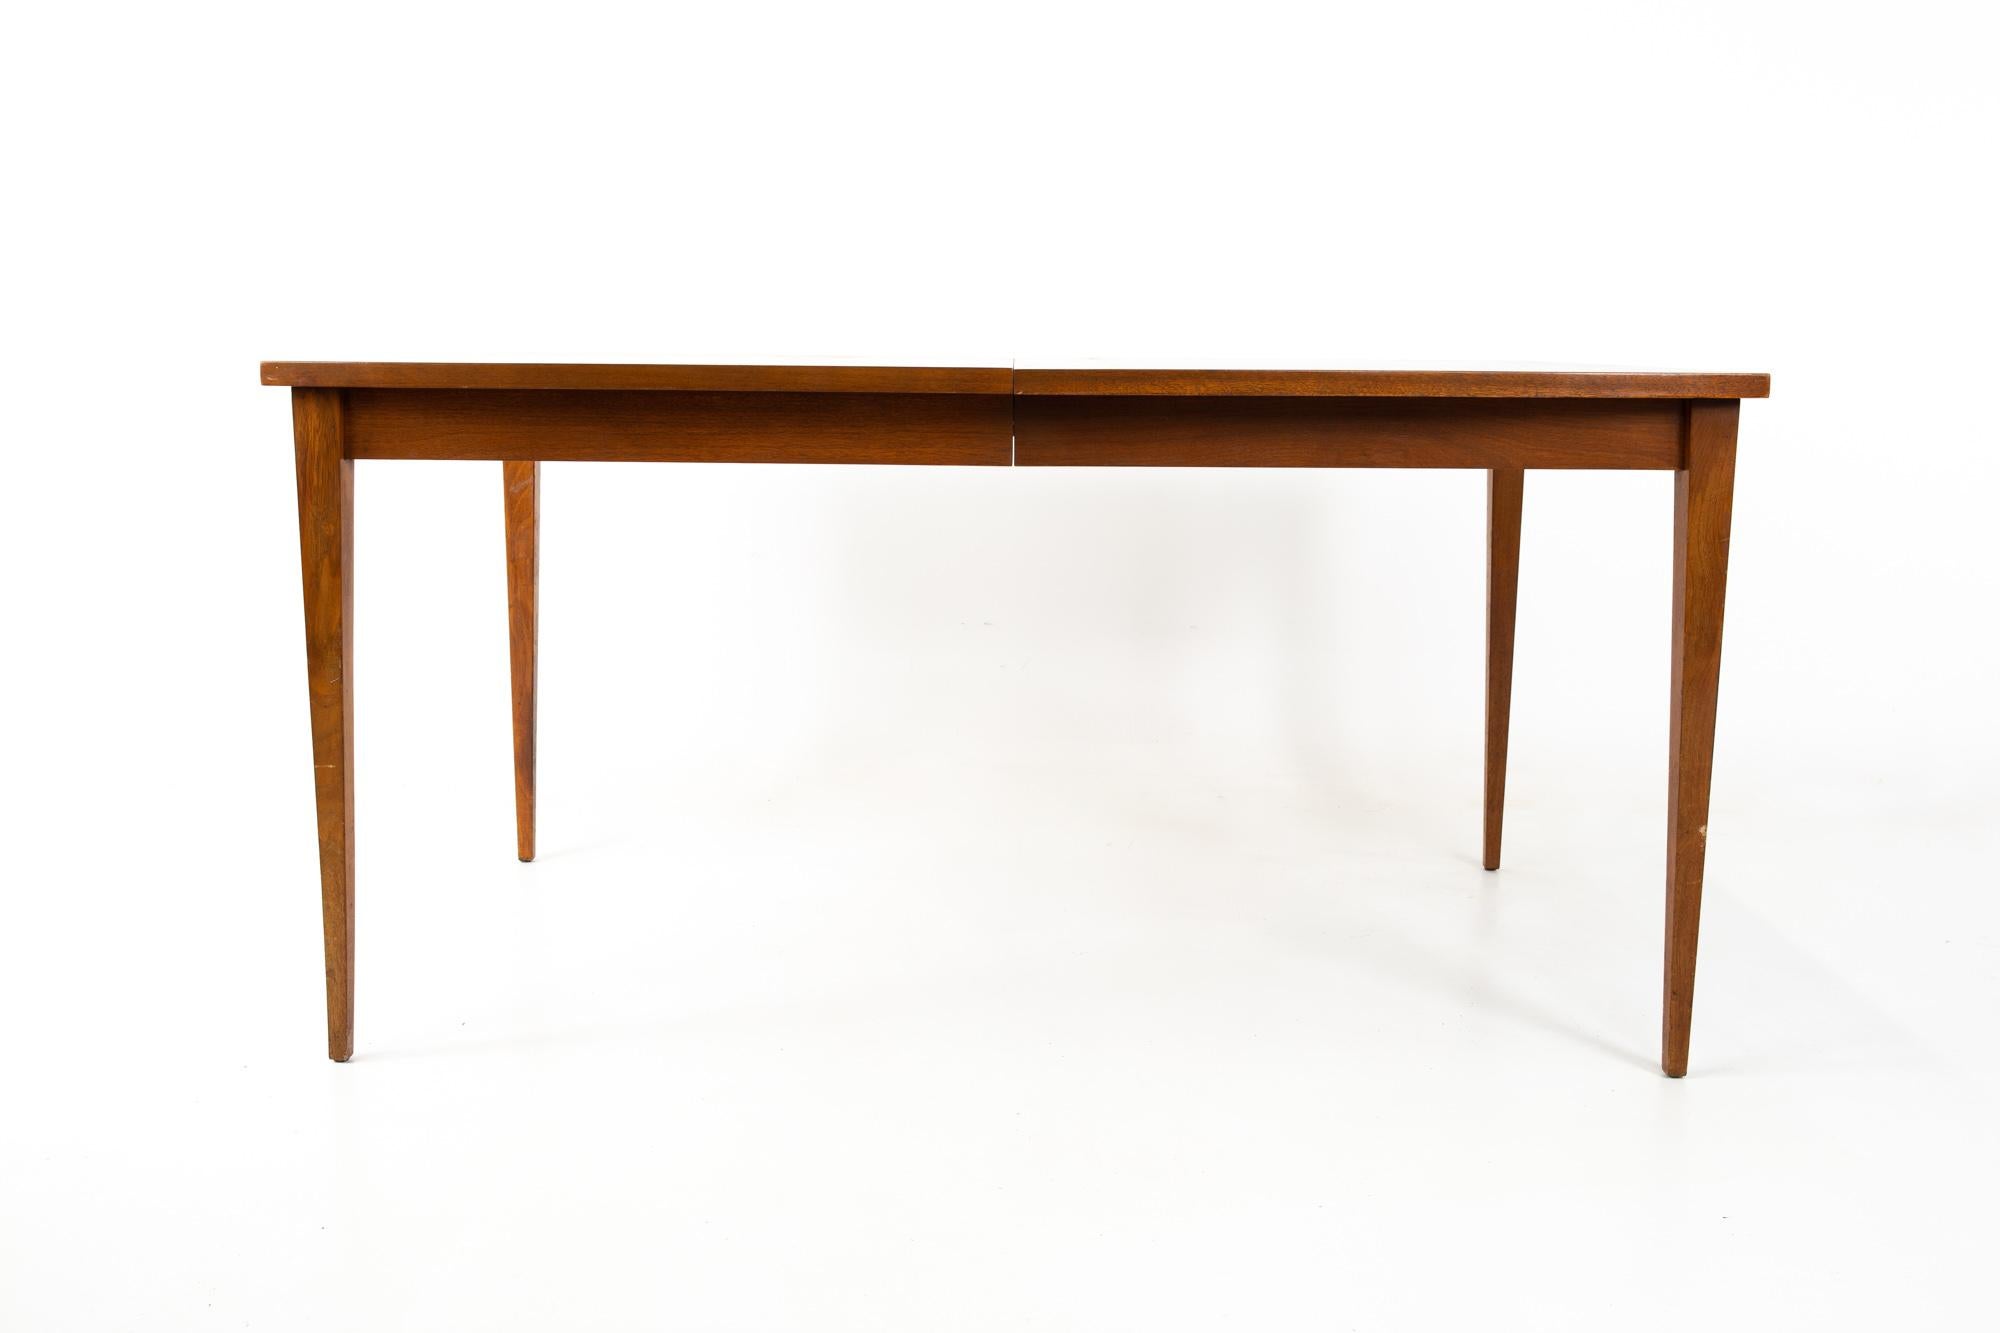 American of Martinsville Mid Century walnut 10 person dining table
Without leaves this table measures: 60 wide x 40 deep x 30 inches high and has a chair clearance of 25.5 inches; with the two 18 inch leaves the table measures 96 inches wide

This